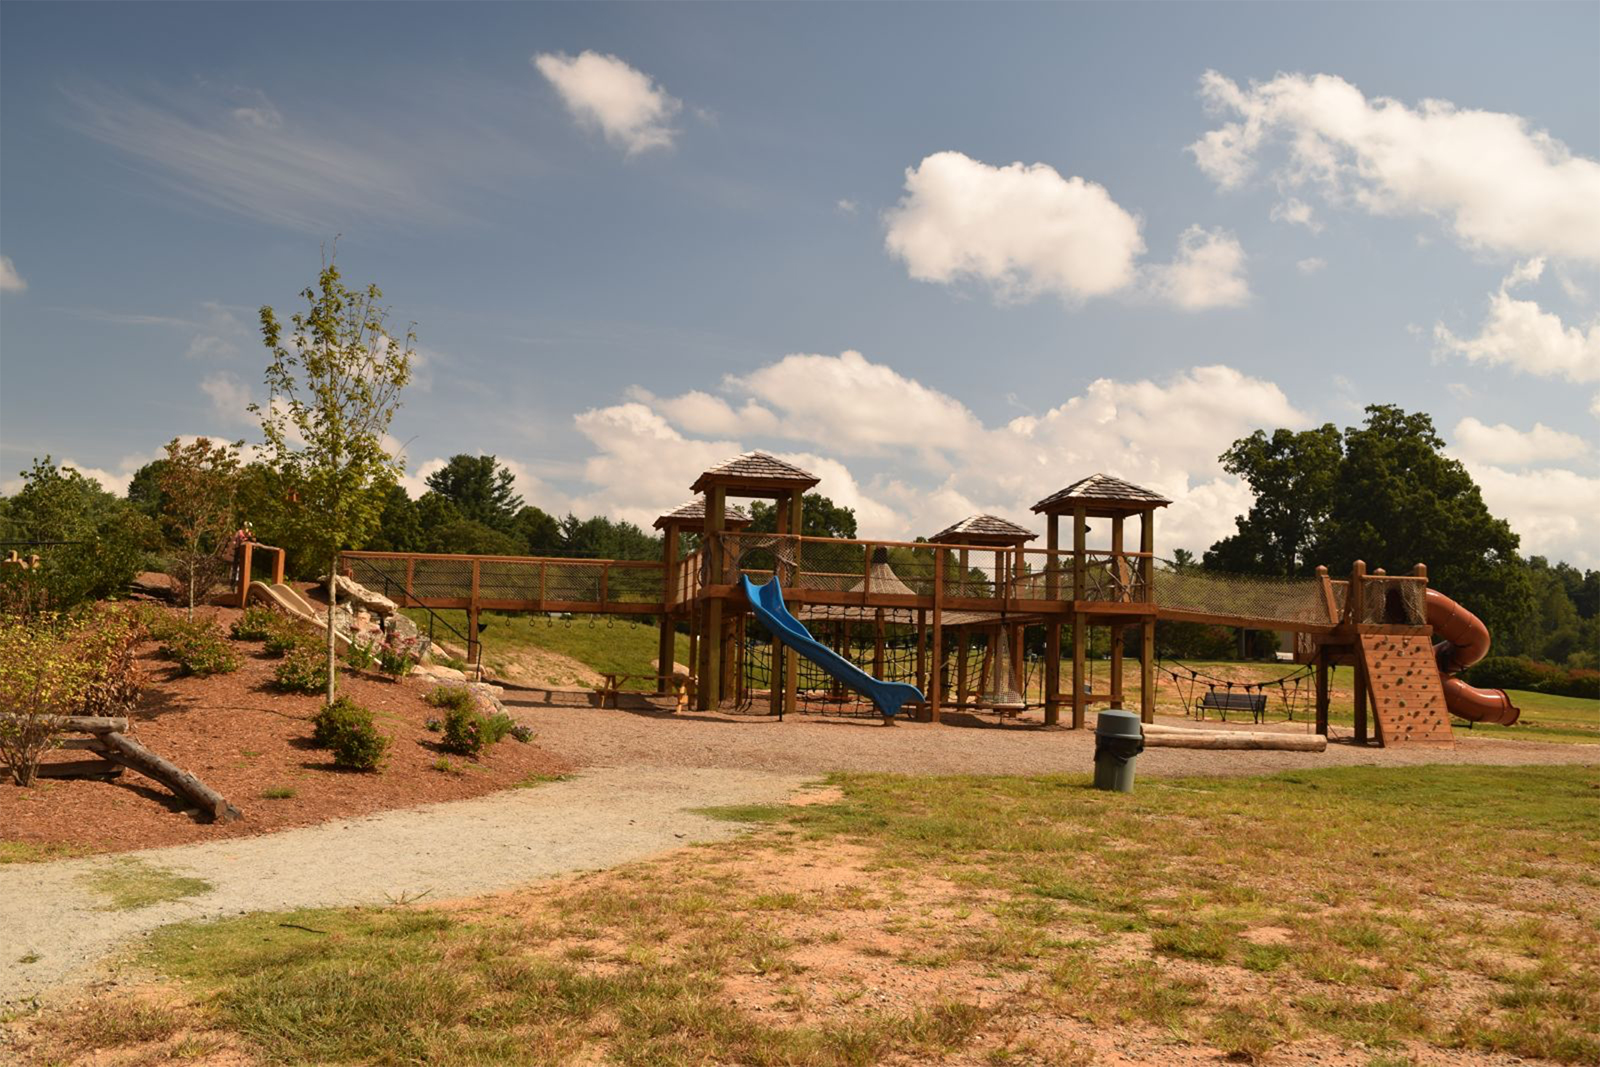 The Park at Flat Rock - Conserving Carolina - Community Green Space1600 x 1067